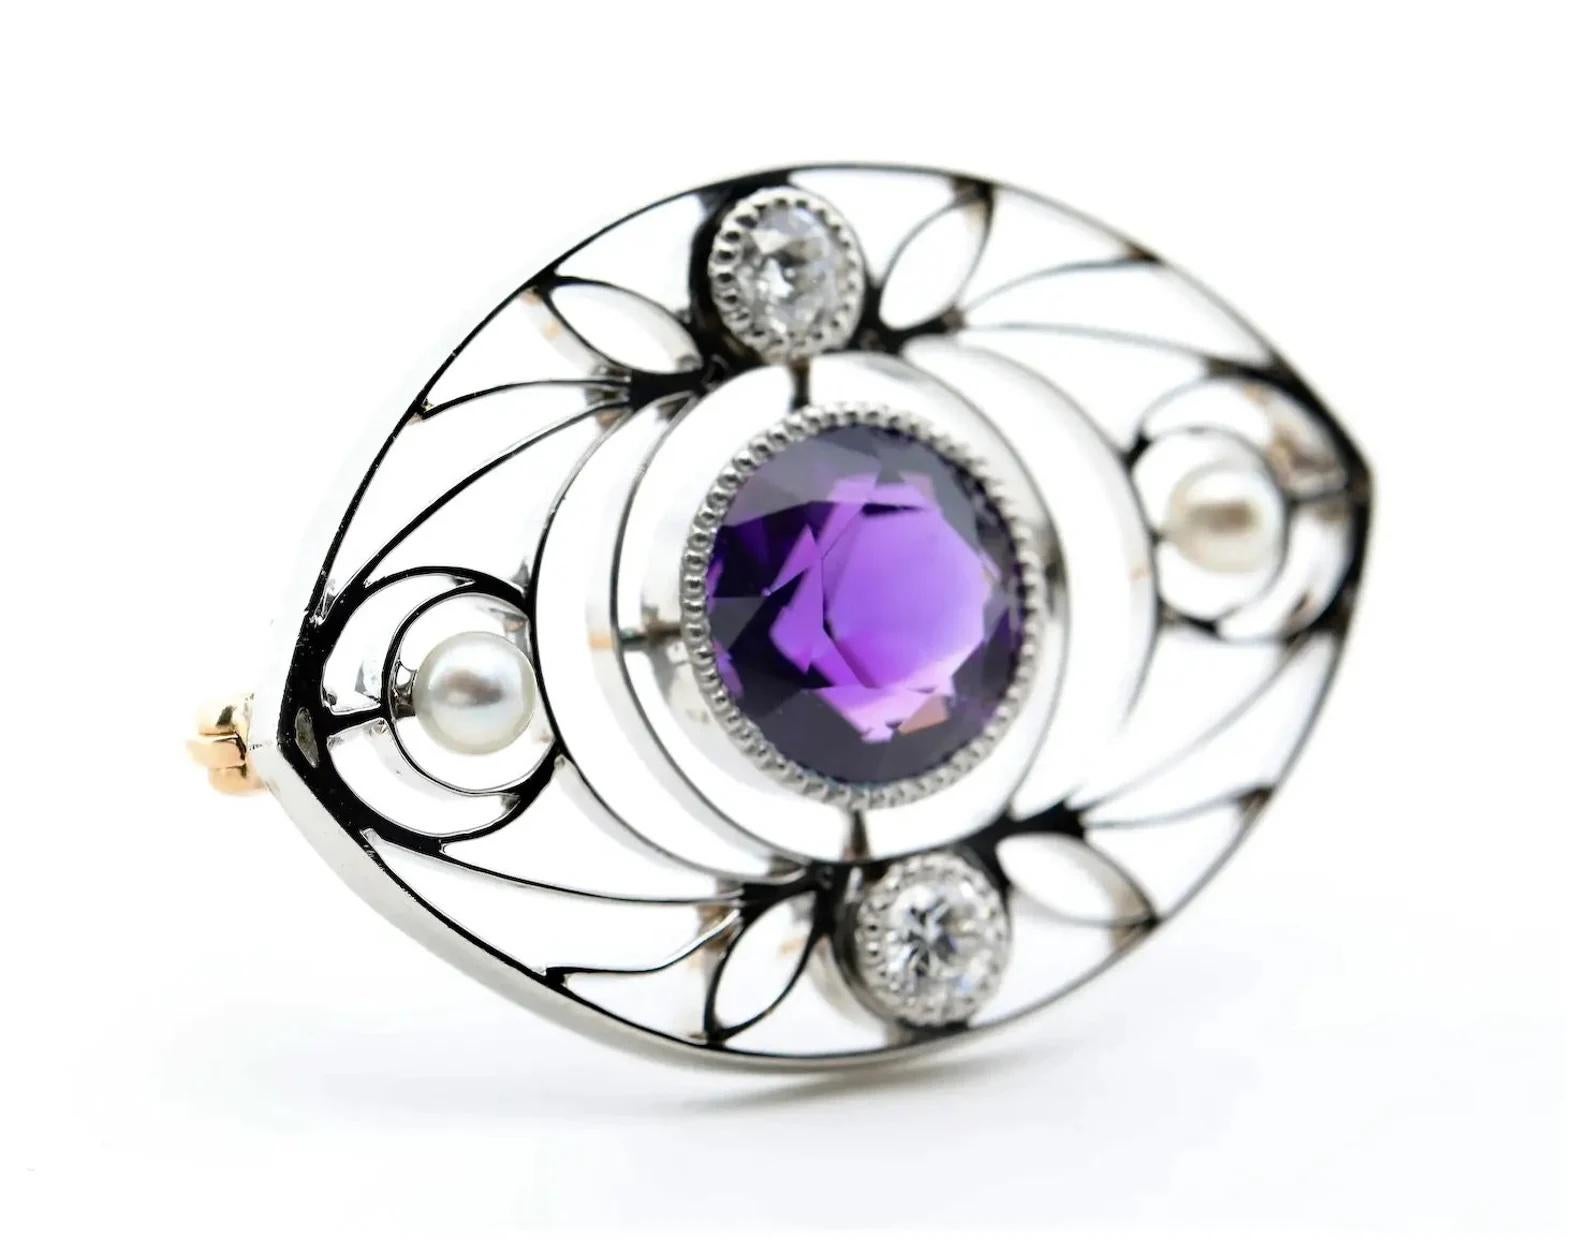 An Art Nouveau period amethyst brooch accented by natural pearls and European cut diamonds in a wire work mounting.

Weighing 2.50 carats, the center amethyst is of rich vivid purple color and sits in a miligrained bezel setting.

Two old European